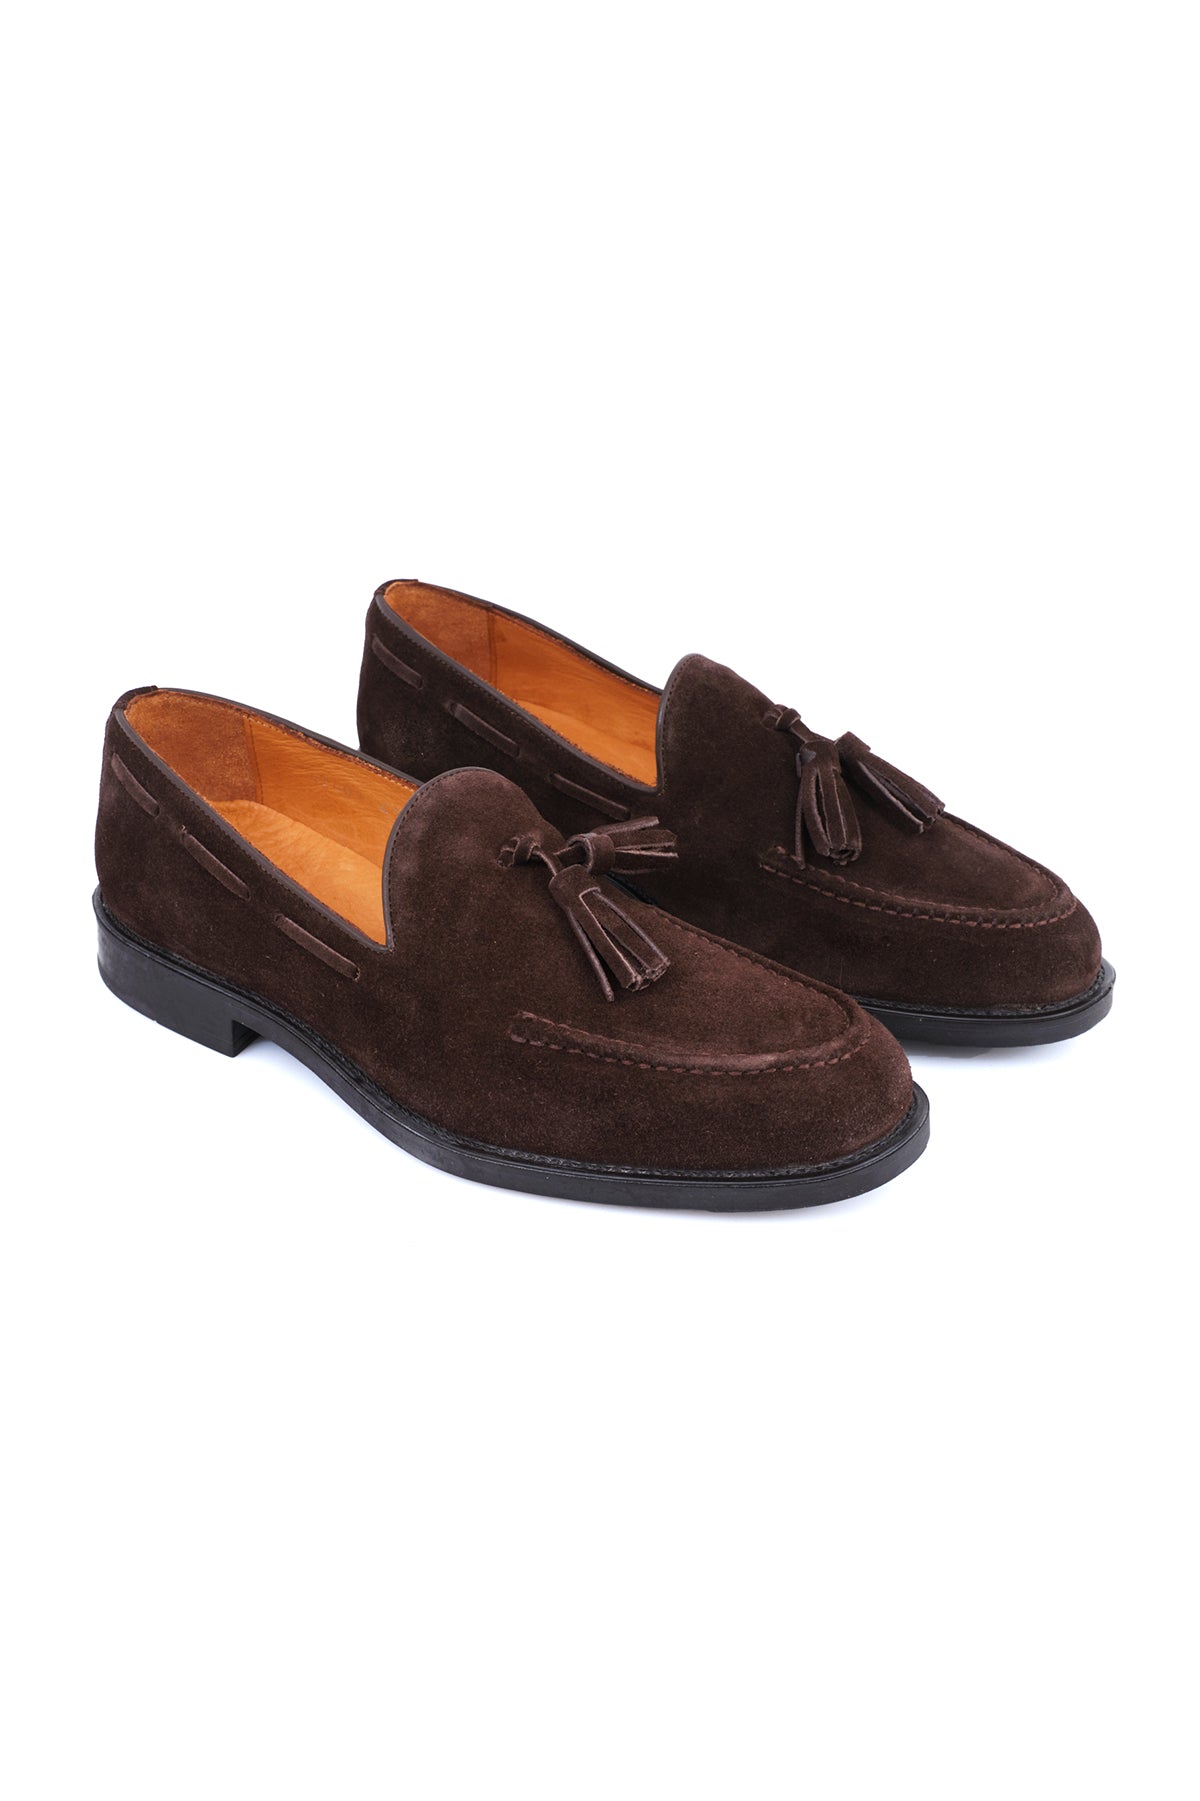 SUEDE TASSEL LOAFERS ΚΑΦΕ.